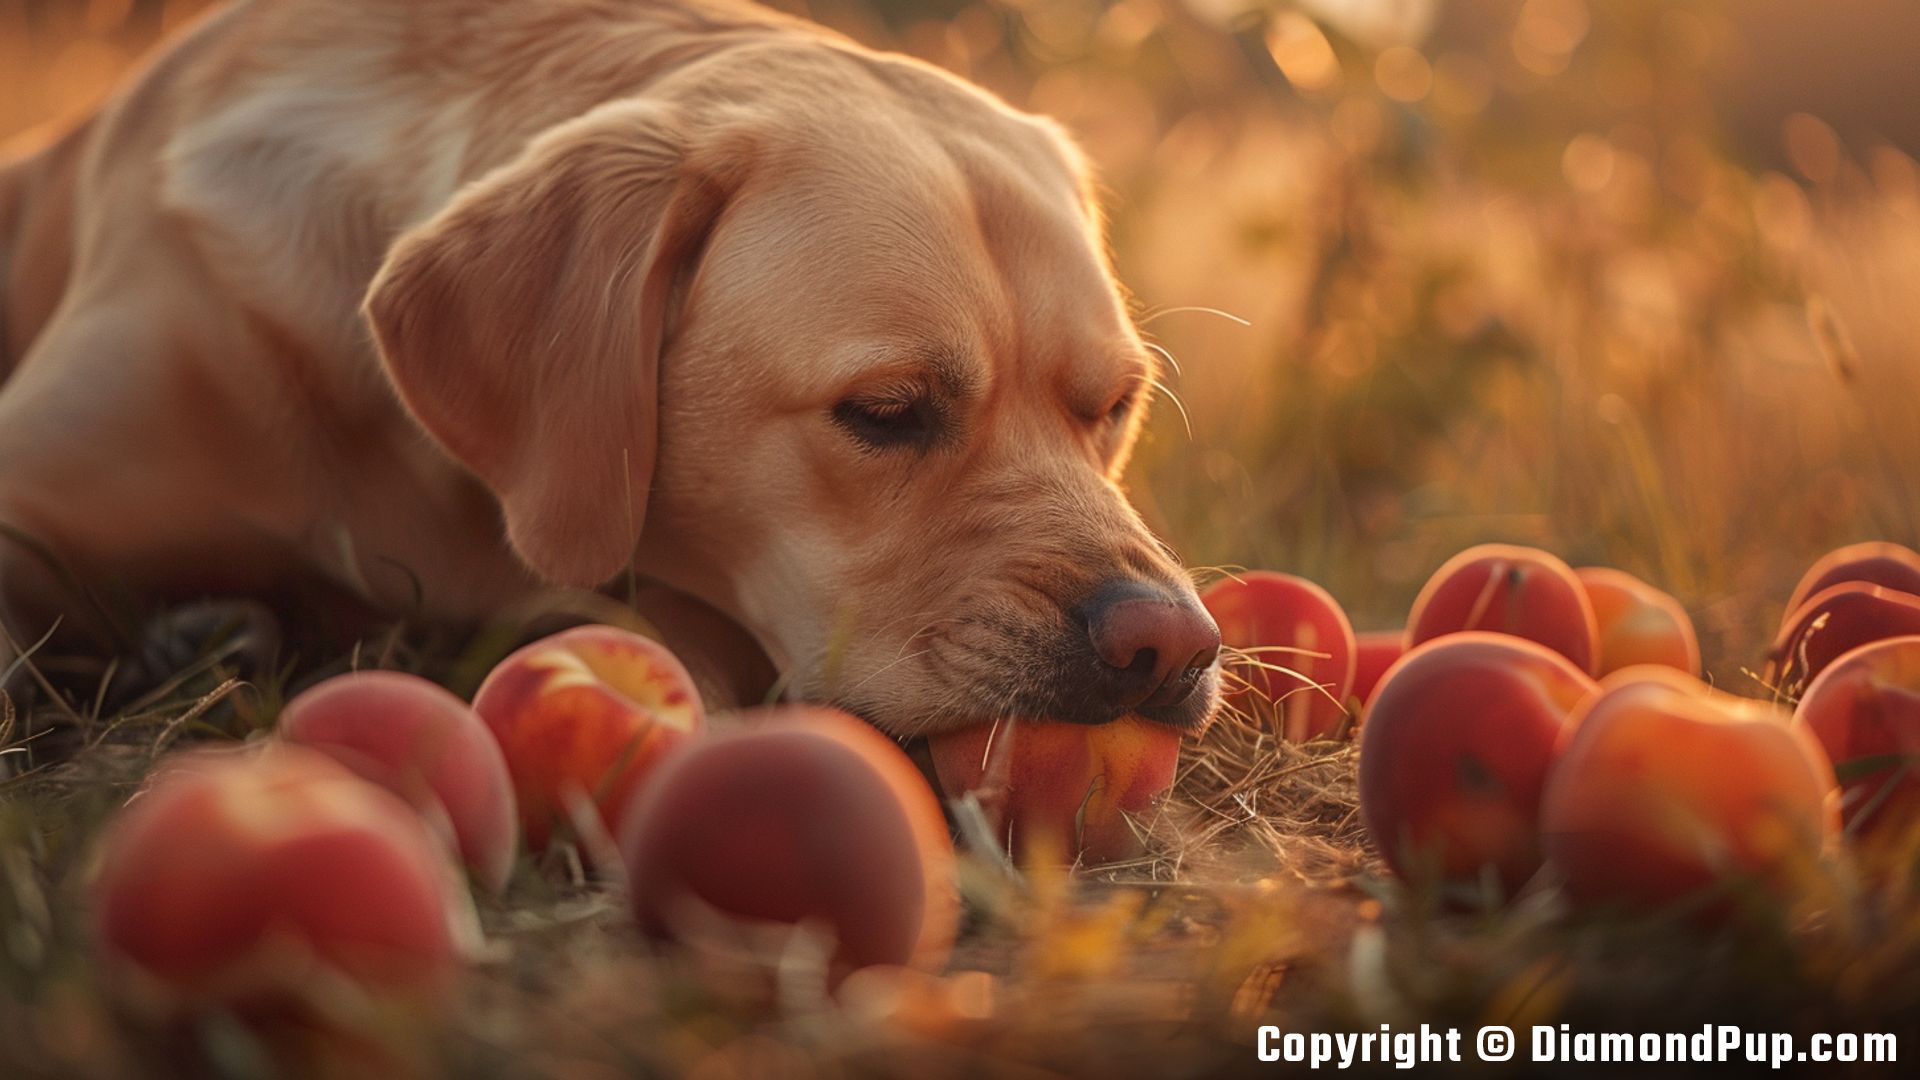 Image of a Happy Labrador Eating Peaches